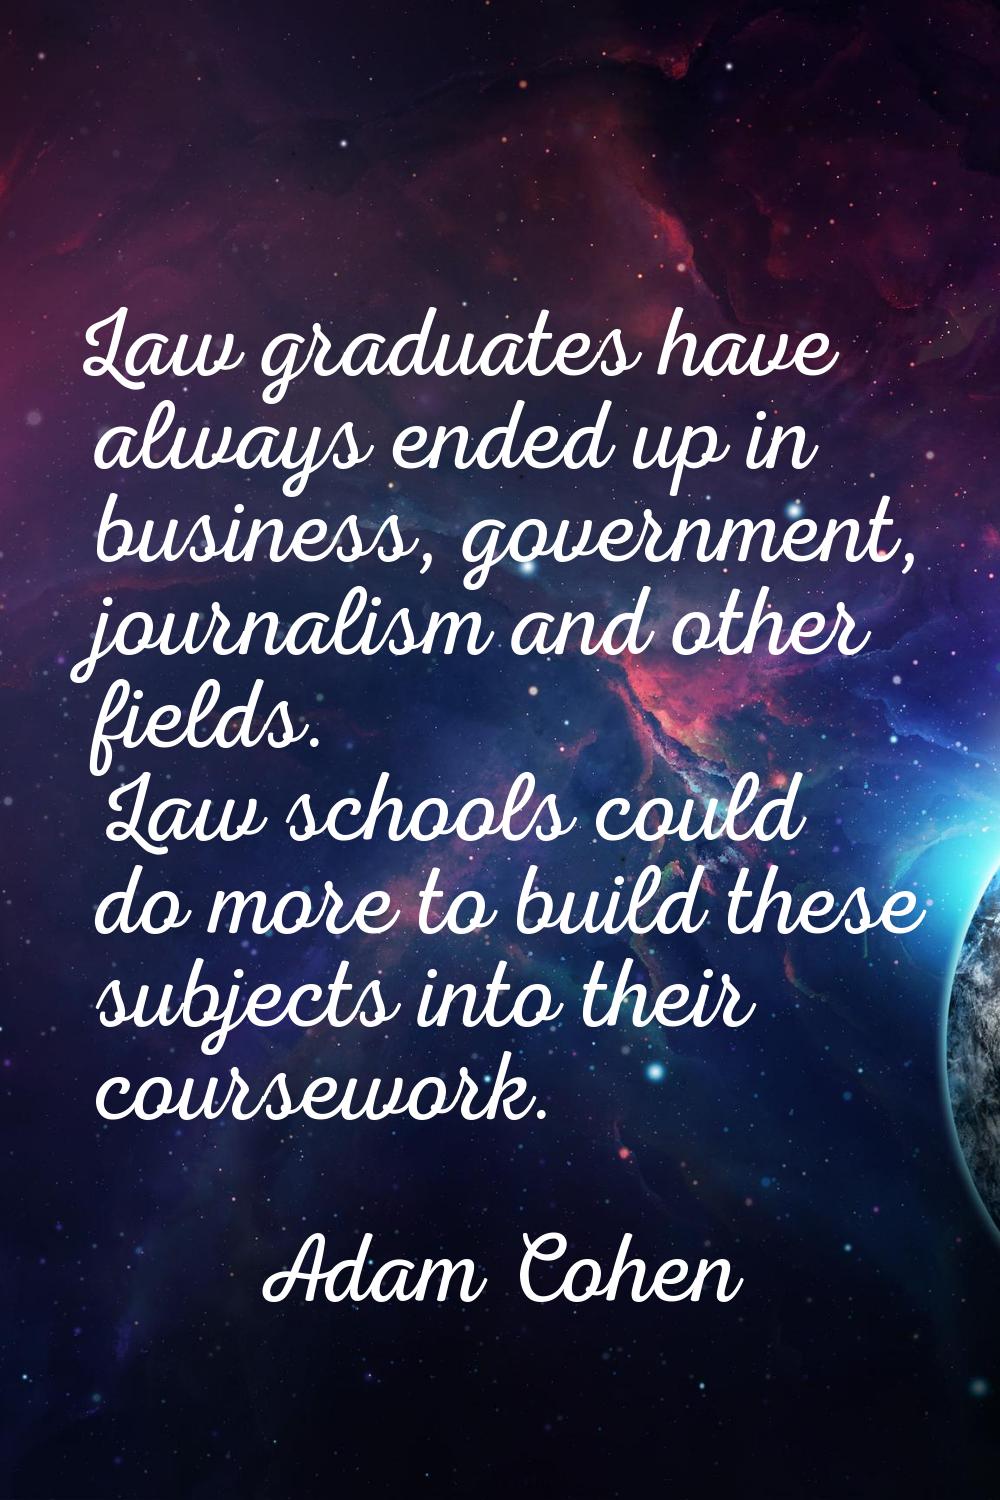 Law graduates have always ended up in business, government, journalism and other fields. Law school